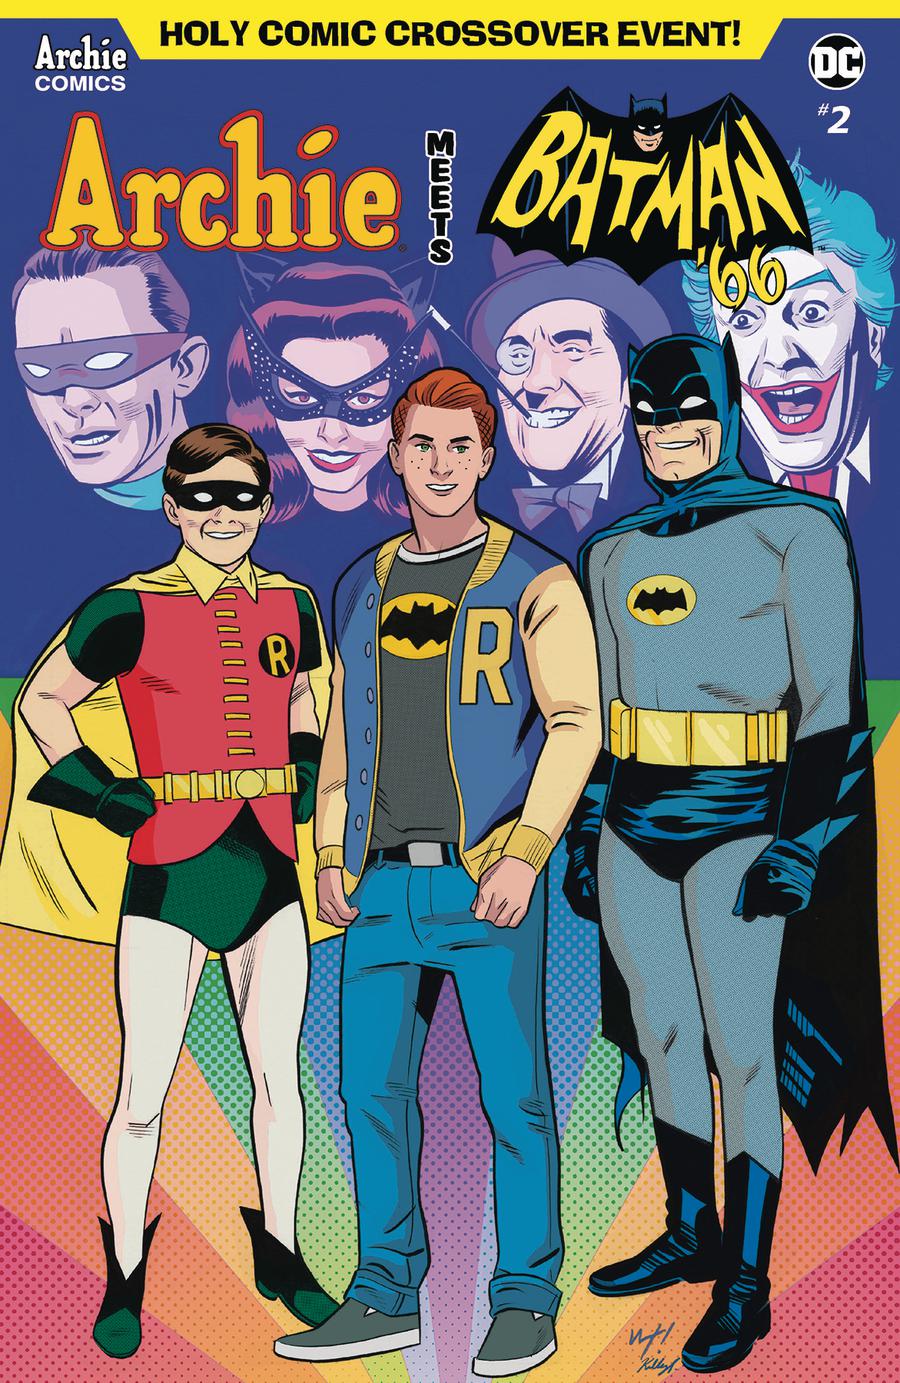 Archie Meets Batman 66 #2 Cover E Variant Wilfredo Torres & Kelly Fitzpatrick Cover